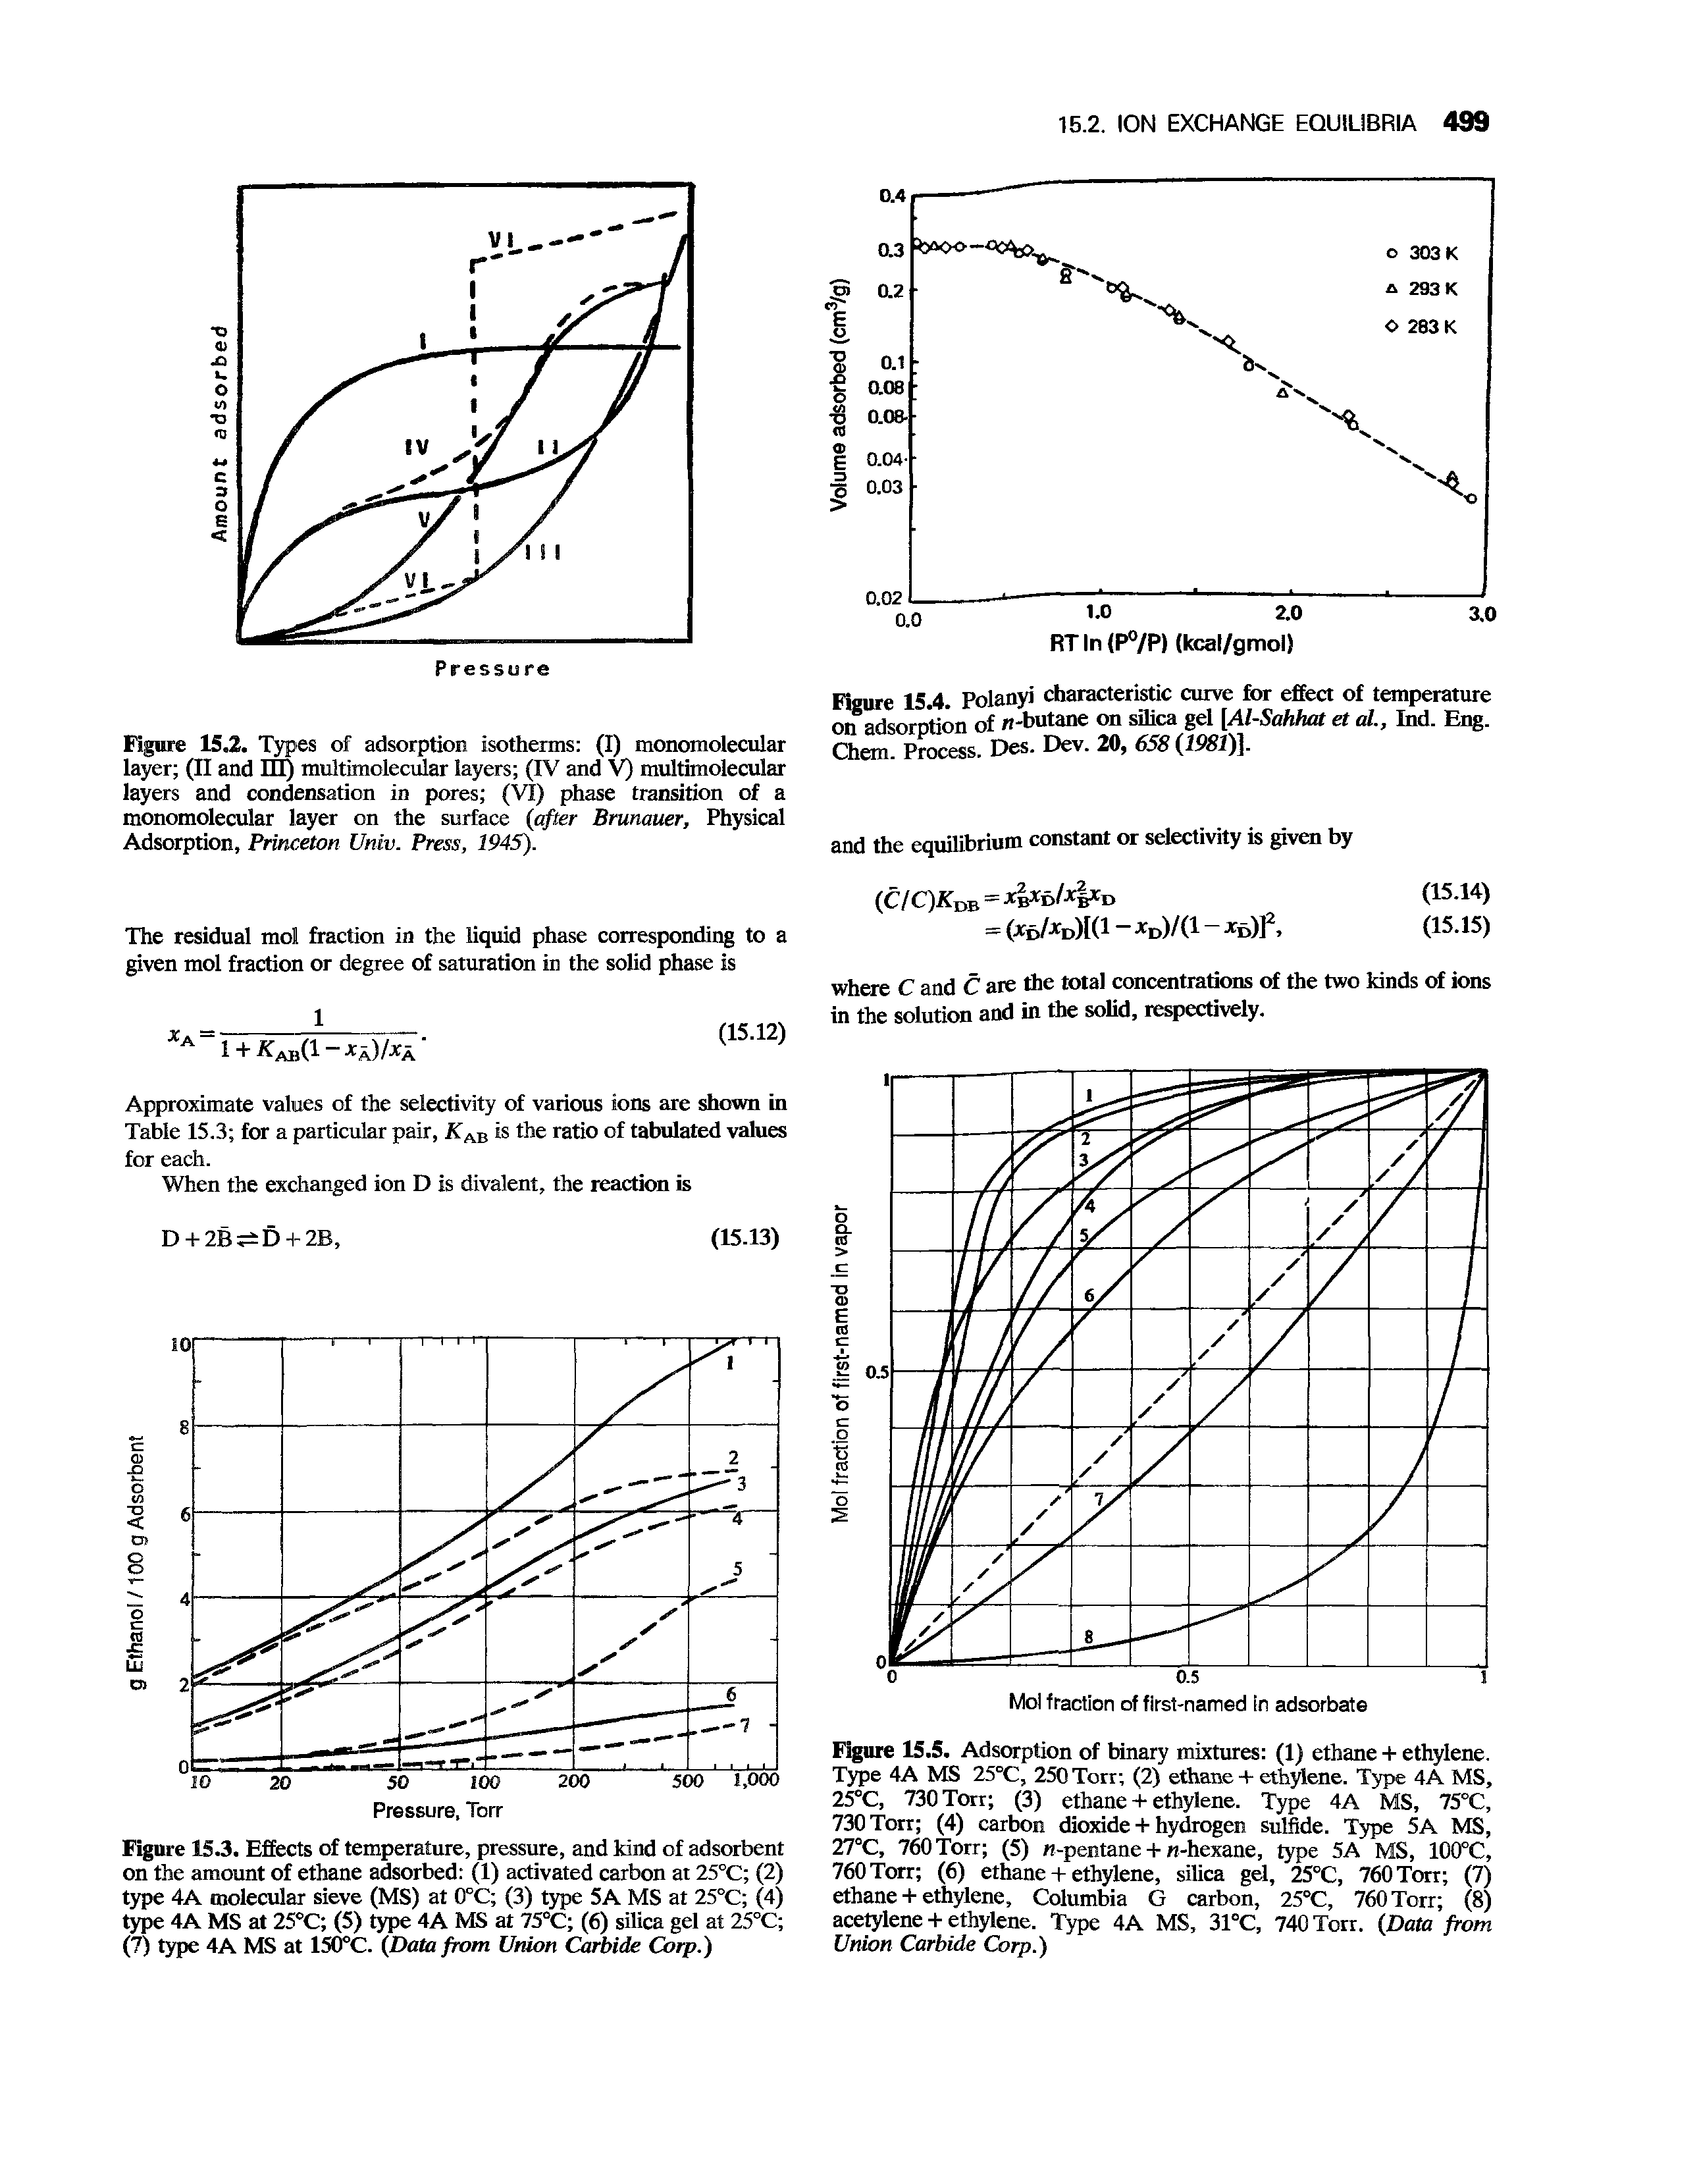 Figure 15.3. Effects of temperature, pressure, and kind of adsorbent on the amount of ethane adsorbed (1) activated carbon at 25°C (2) type 4A molecular sieve (MS) at 0°C (3) type 5A MS at 25°C (4) type 4A MS at 25°C (5) type 4A MS at 75°C (6) silica gel at 25°C (7) type 4A MS at 150°C. (Data from Union Carbide Corp.)...